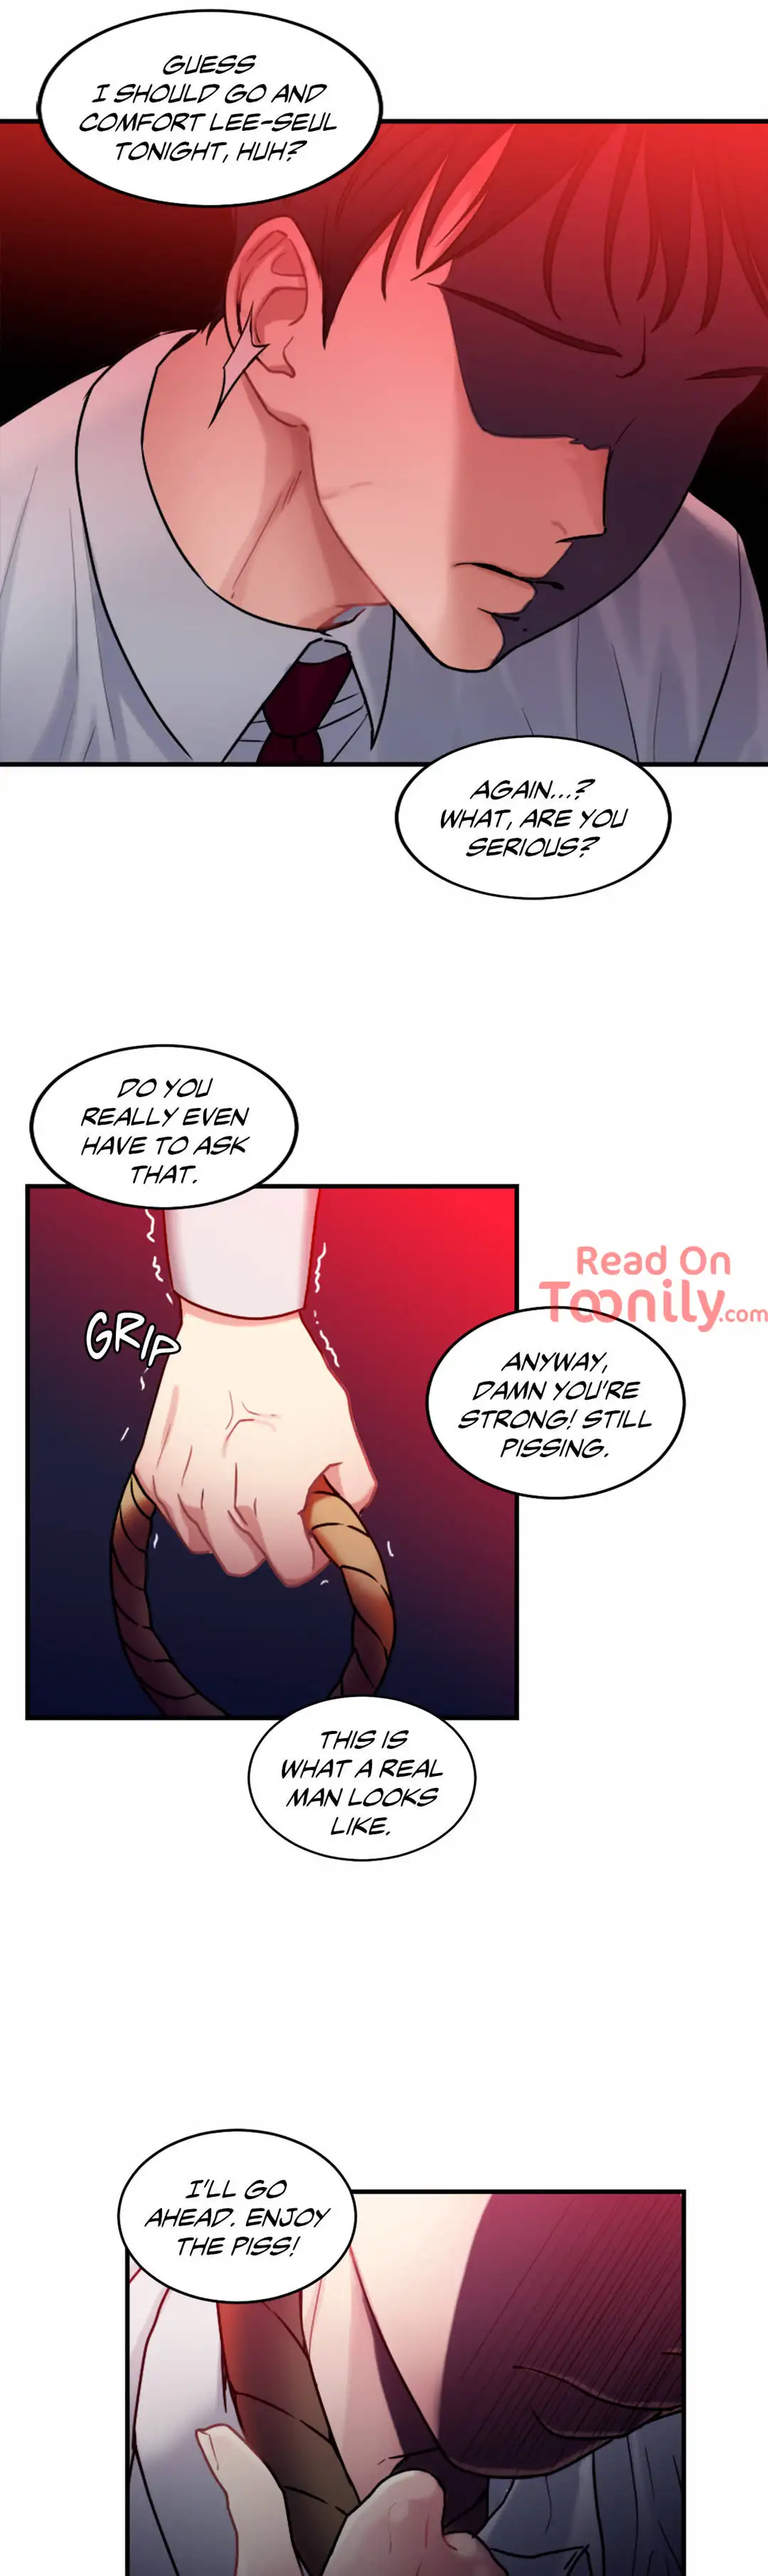 Tie Me Up - Chapter 3 Page 36